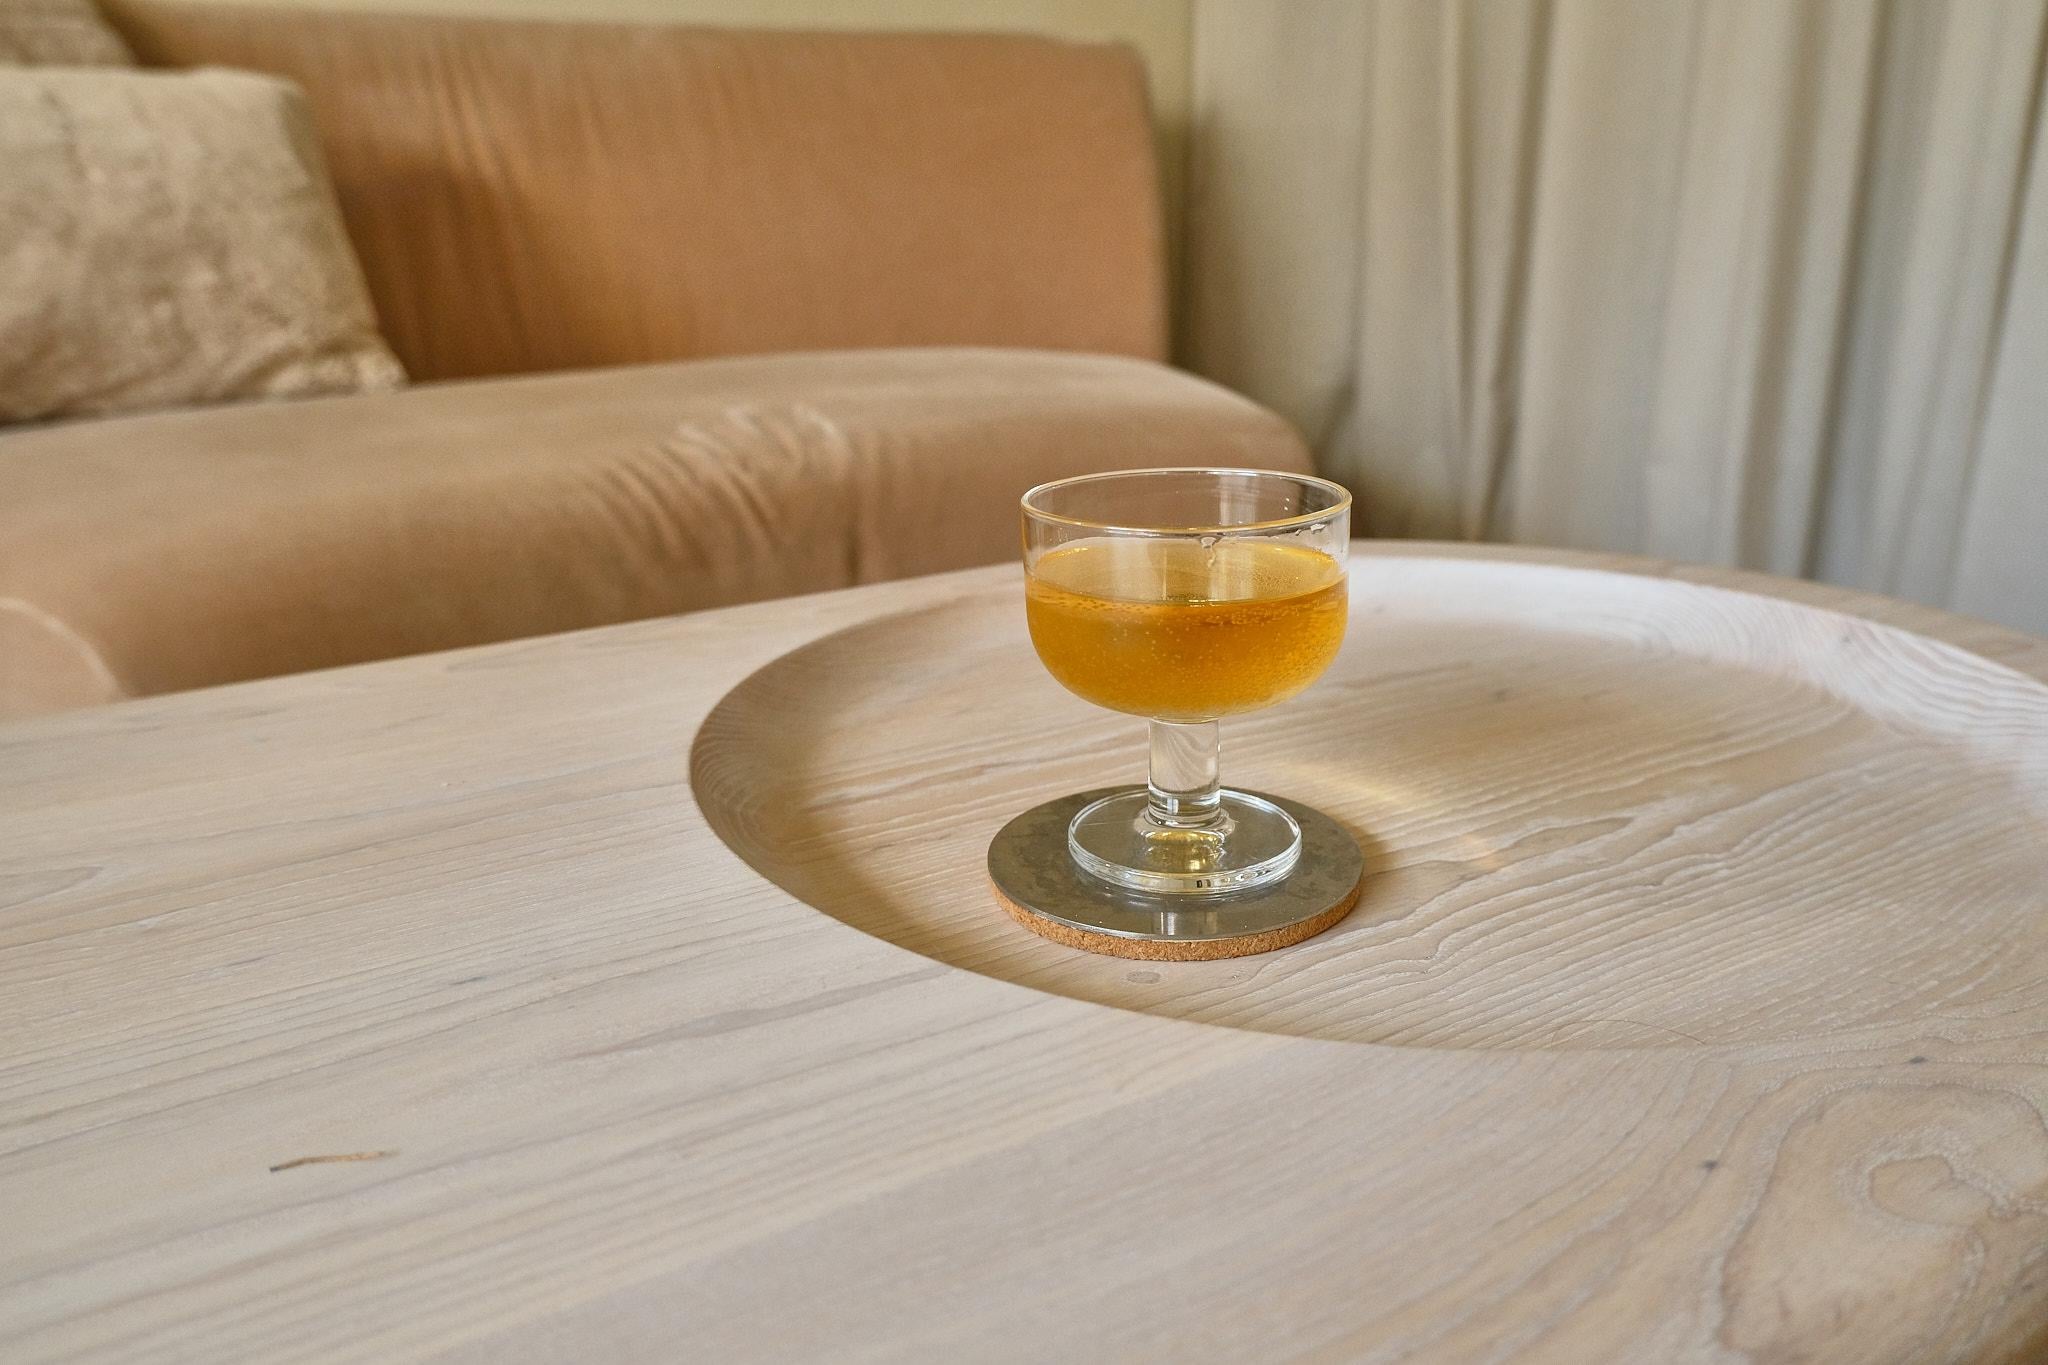 The Cusp Coffee Table is our signature design piece. Created for people who like to make a statement, but keep it subtle, this table is for savoring simple moments with your favorite drink and sharing space with your besties. 

Our design narrative: